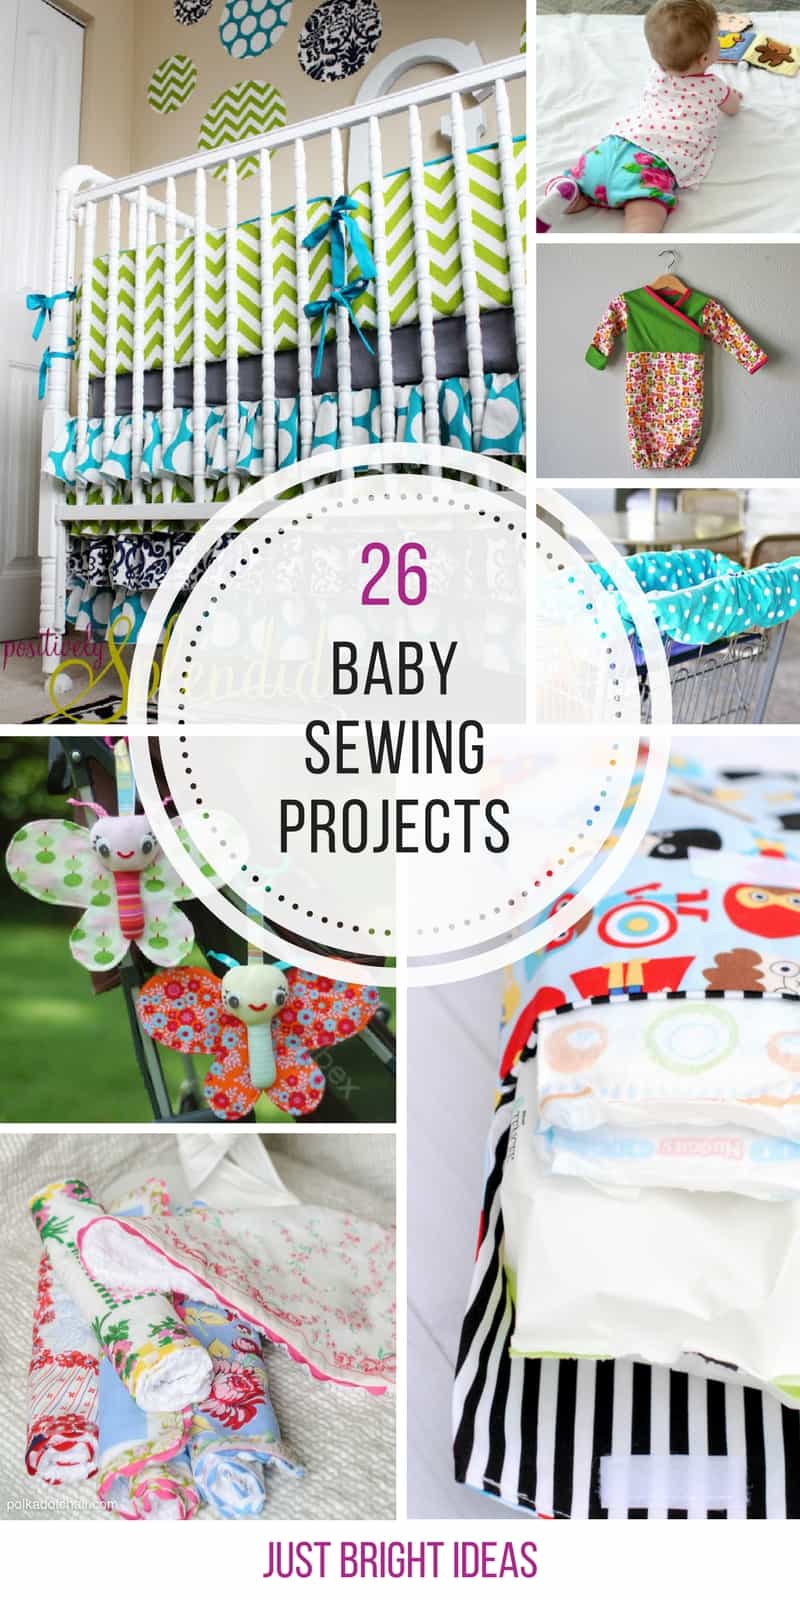 These baby sewing projects are so easy! Thanks for sharing!